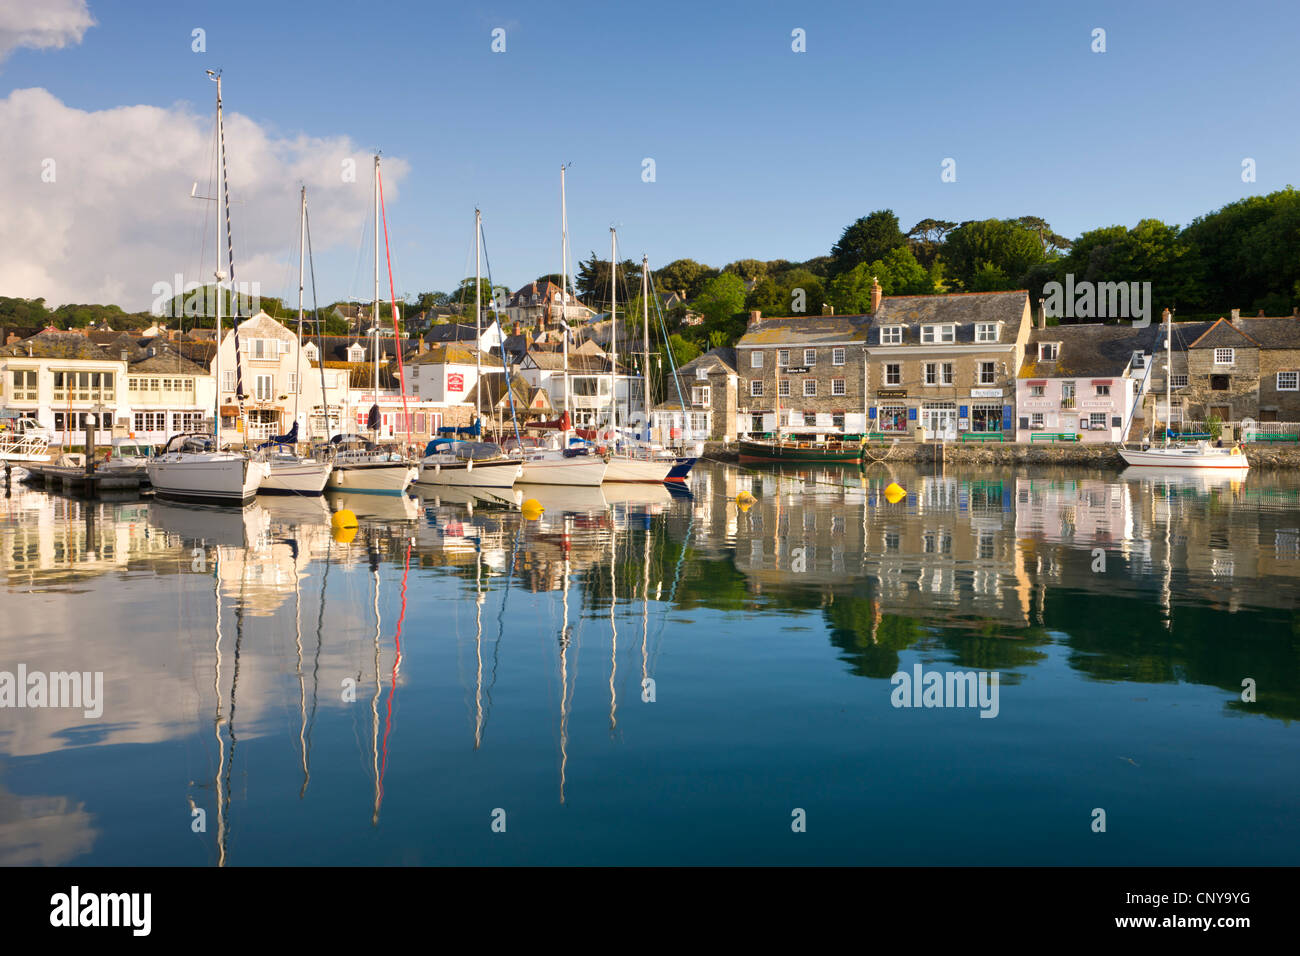 Padstow is a quaint Cornish fishing village with a picturesque harbour on the north coast of Cornwall, Cornwall, England. Stock Photo